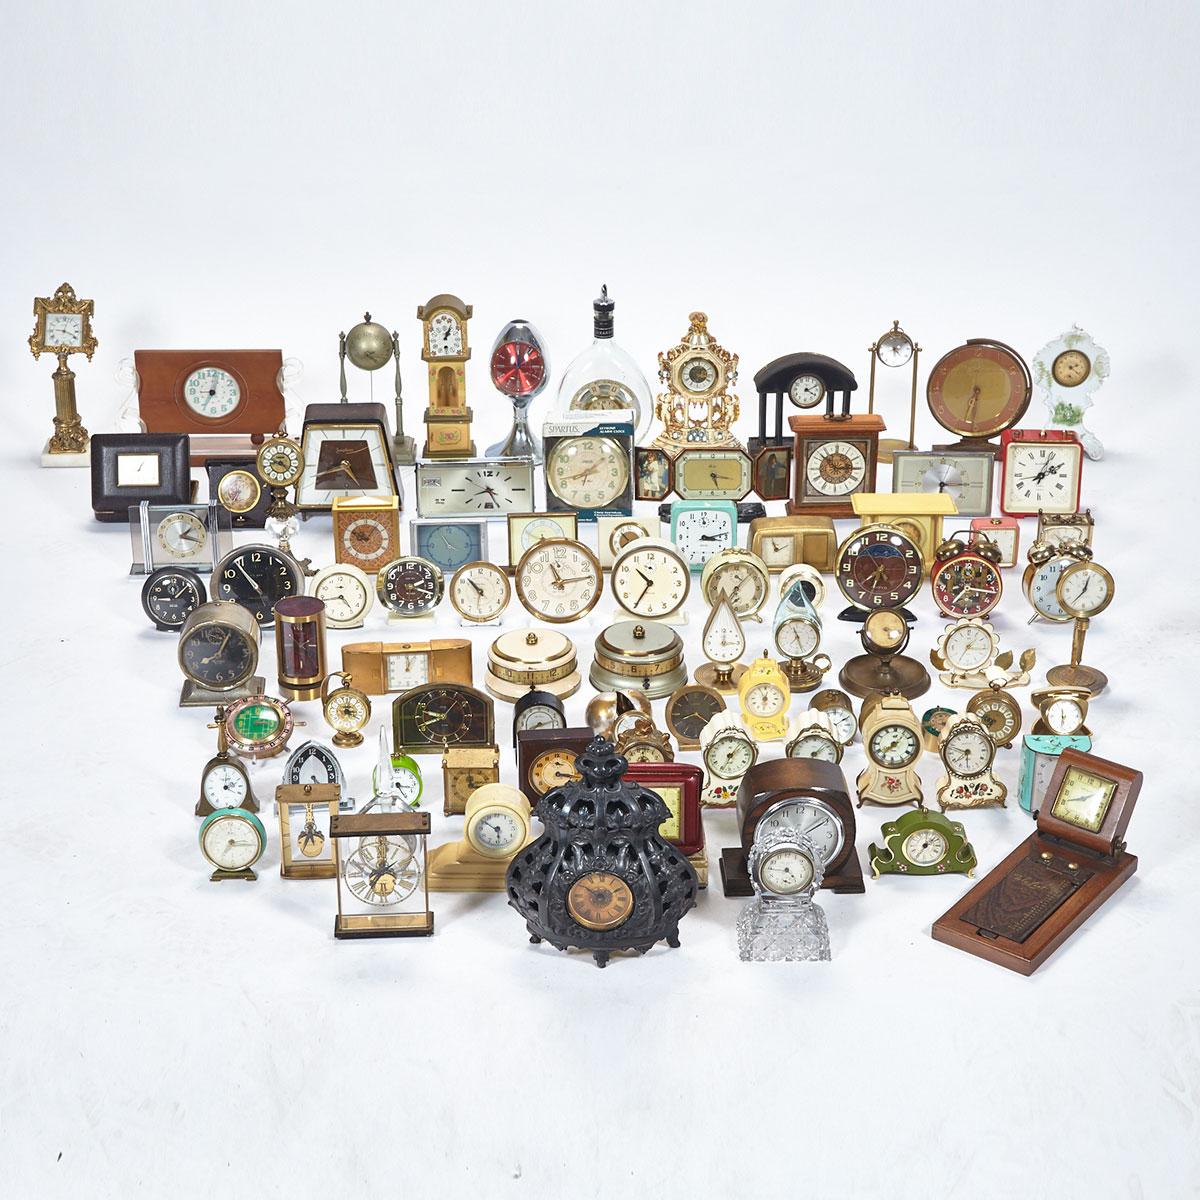 Miscellaneous Lot of Approximately 80 Table, Novelty and Alarm Clocks, 19th and 20th centuries